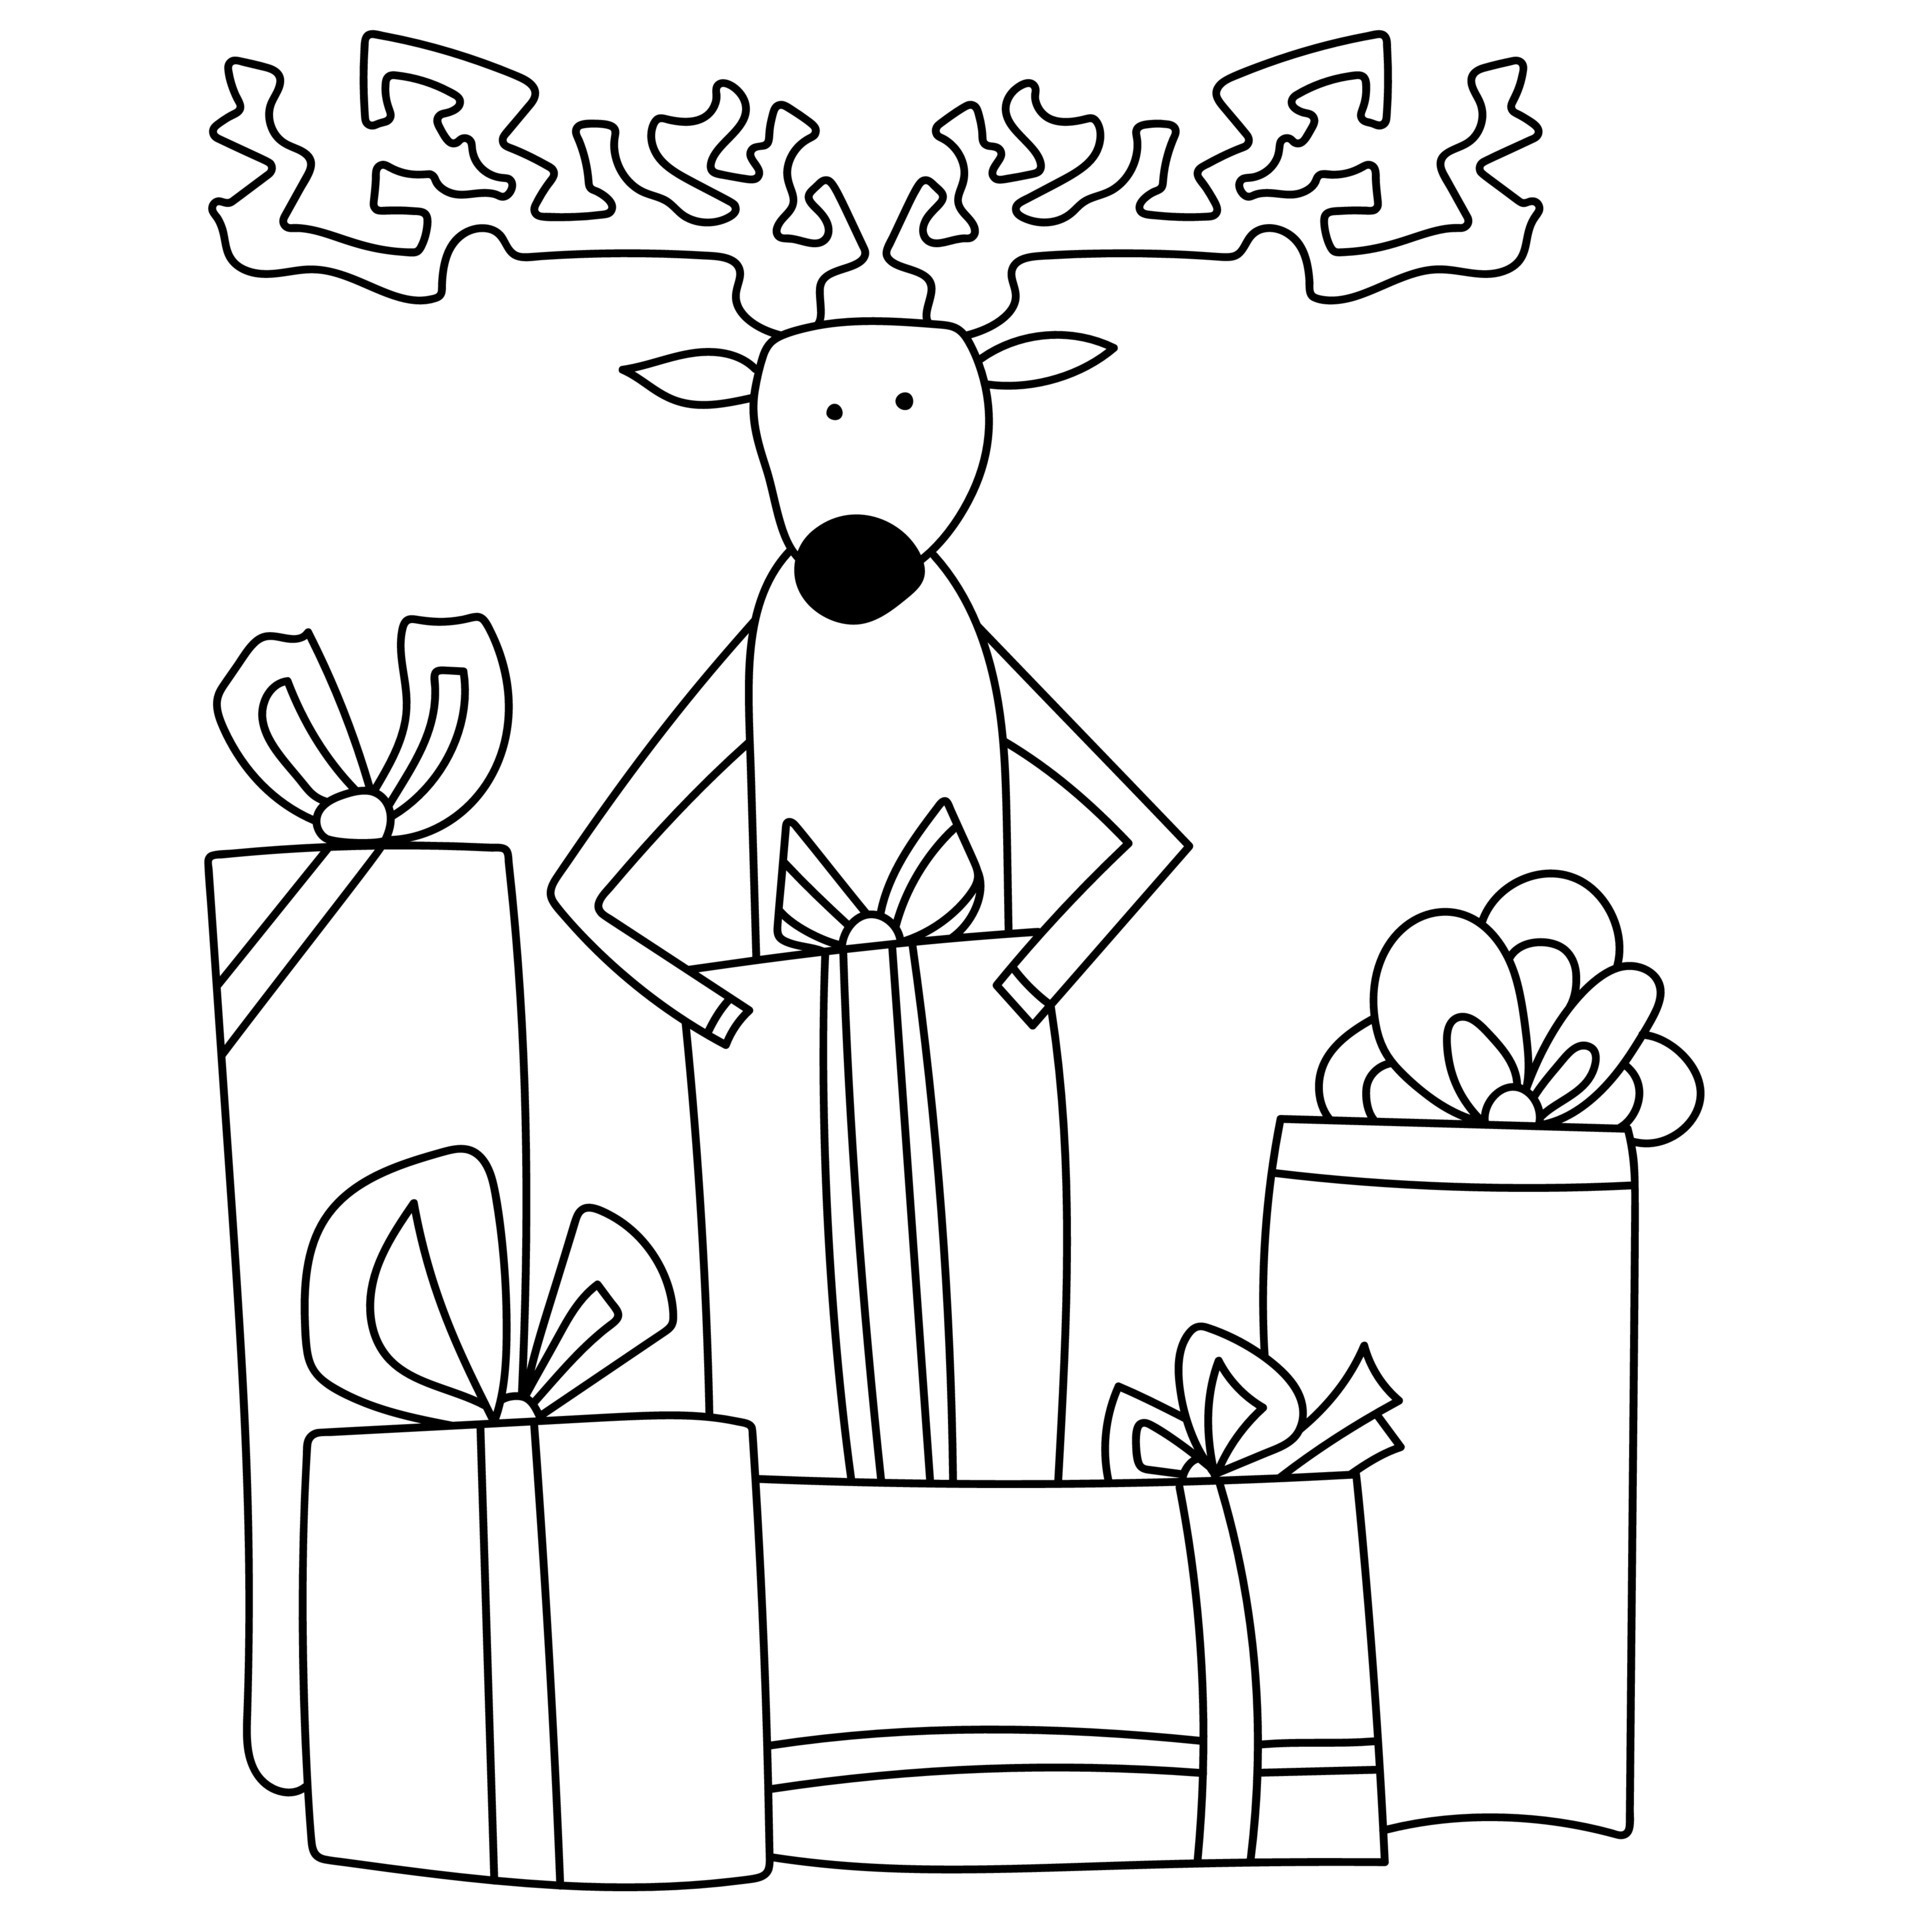 https://static.vecteezy.com/system/resources/previews/009/788/925/original/christmas-coloring-page-with-funny-deer-with-gift-boxes-outline-card-for-creativity-vector.jpg